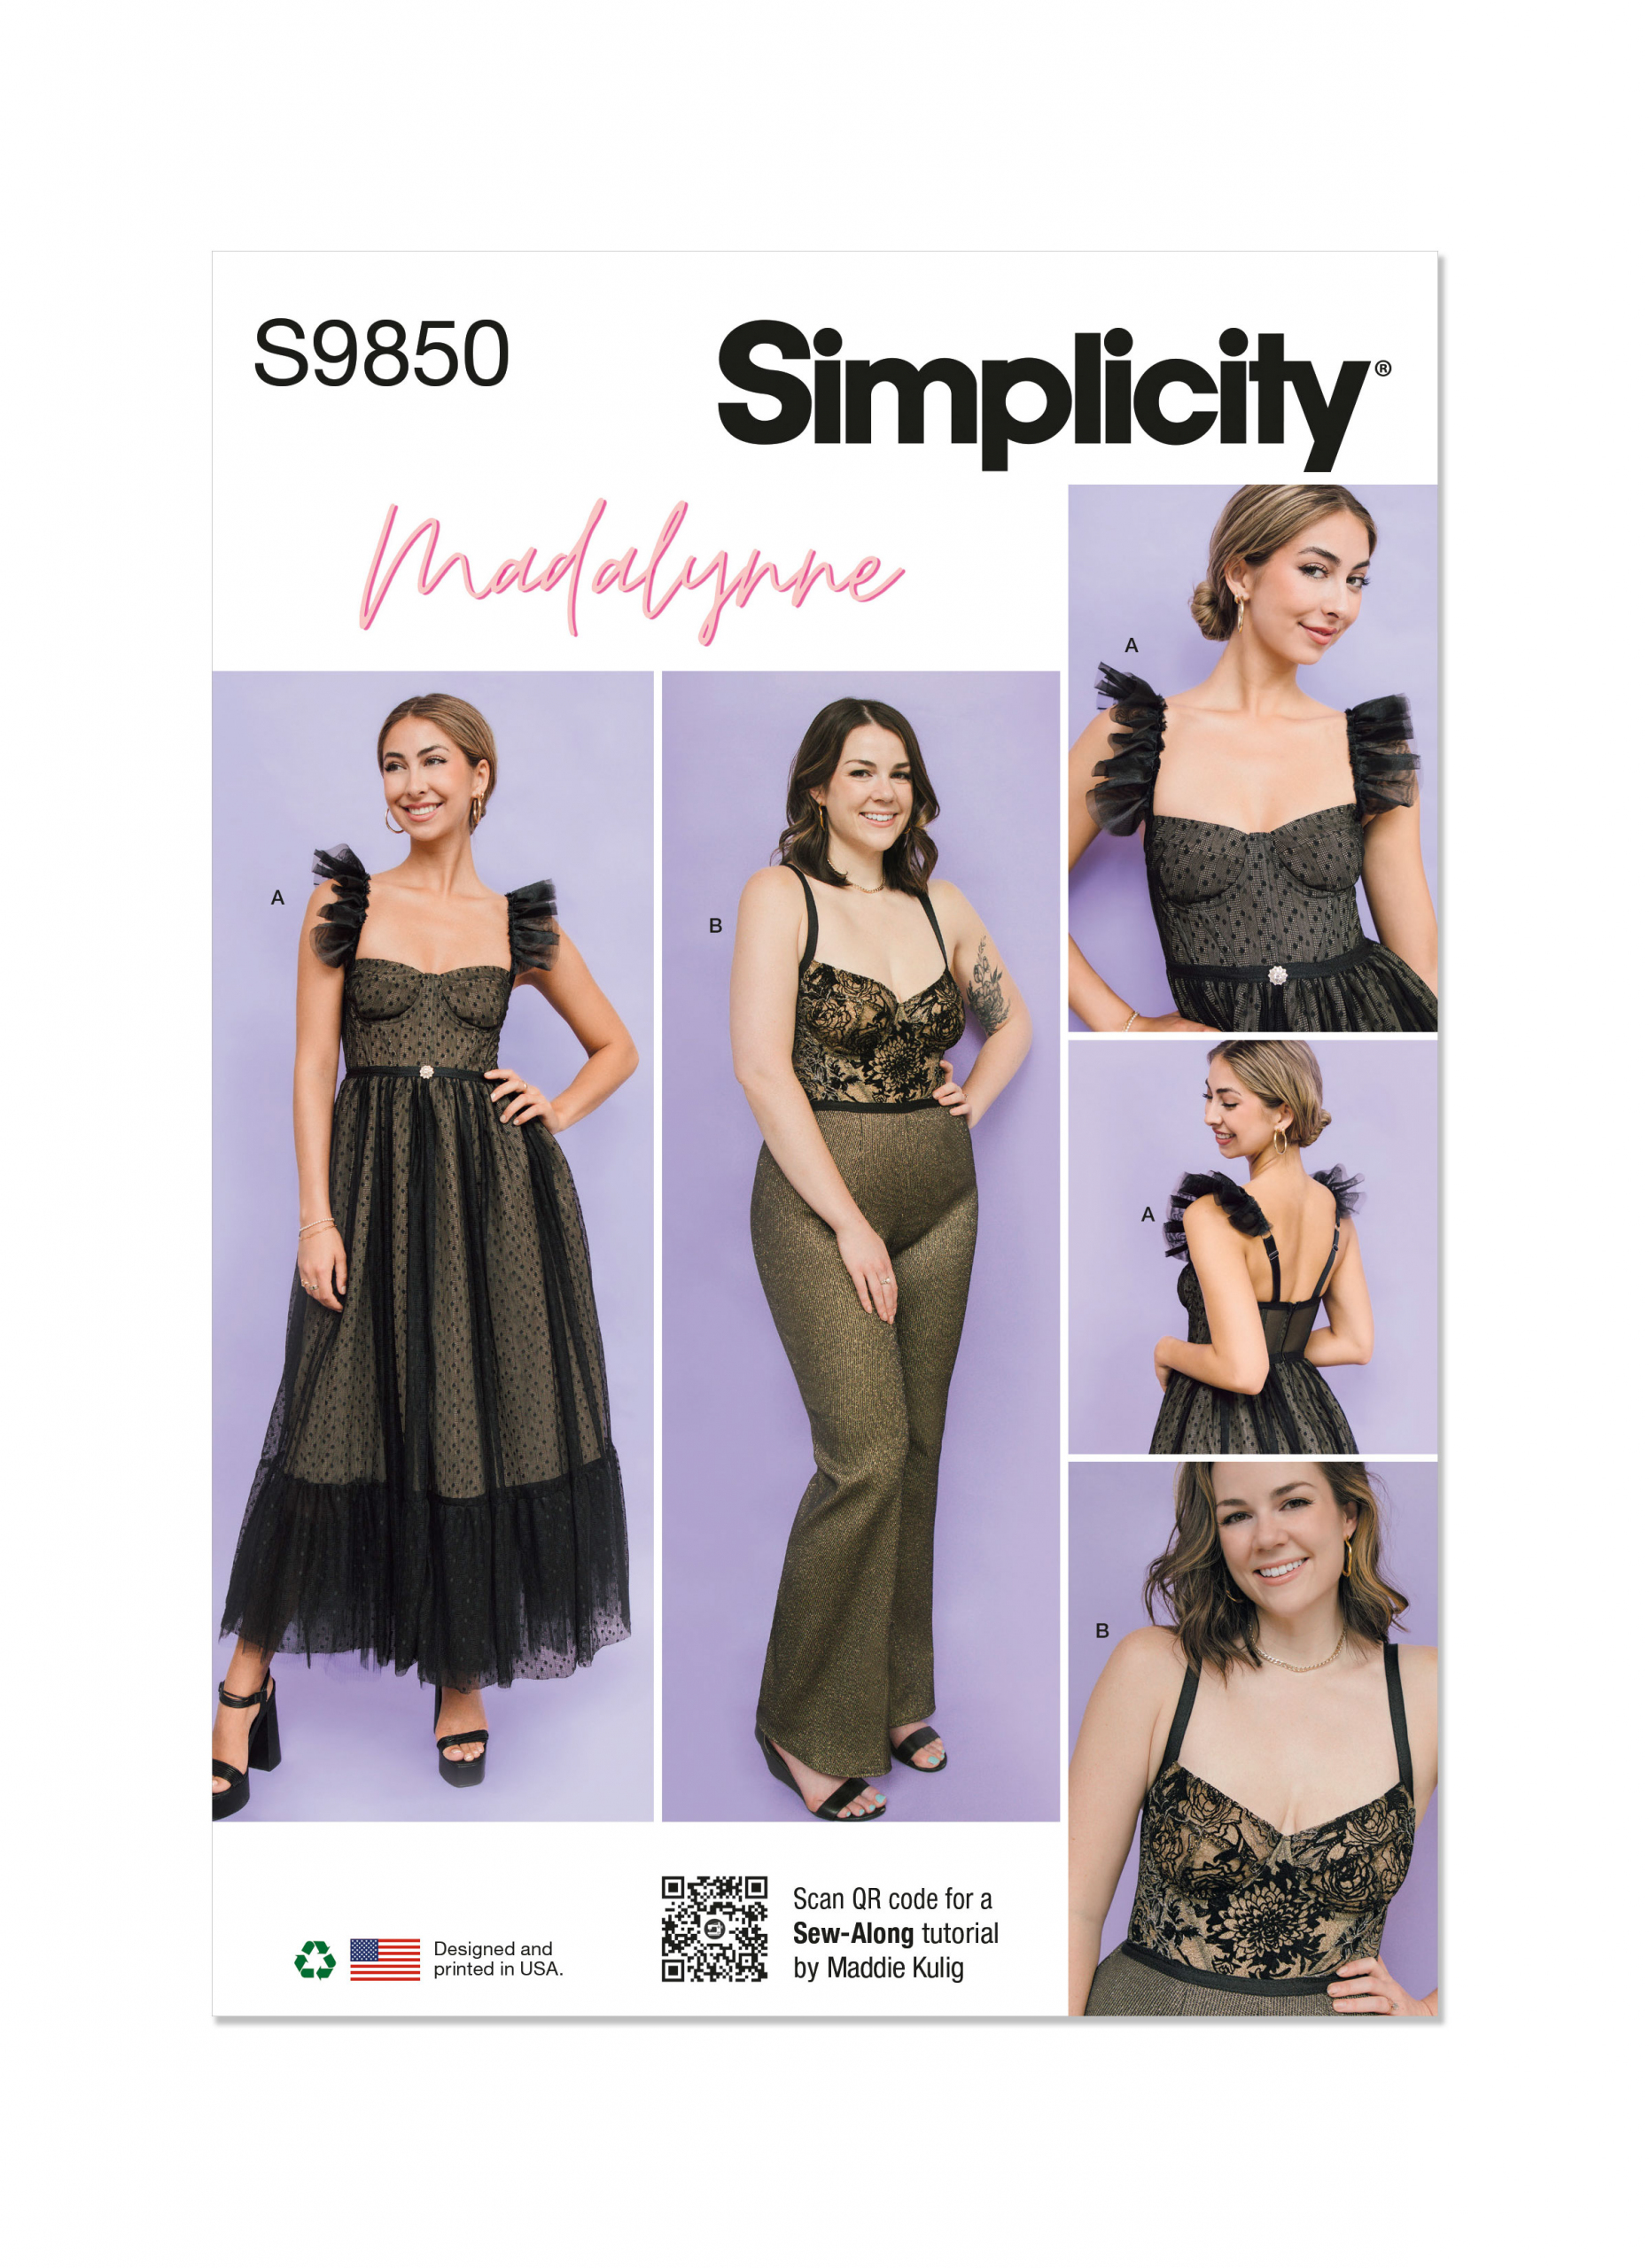 Simplicity Sewing Pattern S9620 Misses' and Women's Knit Sports Bra,  Leggings and Bike Shorts by Madalynne Intimates - Sewdirect